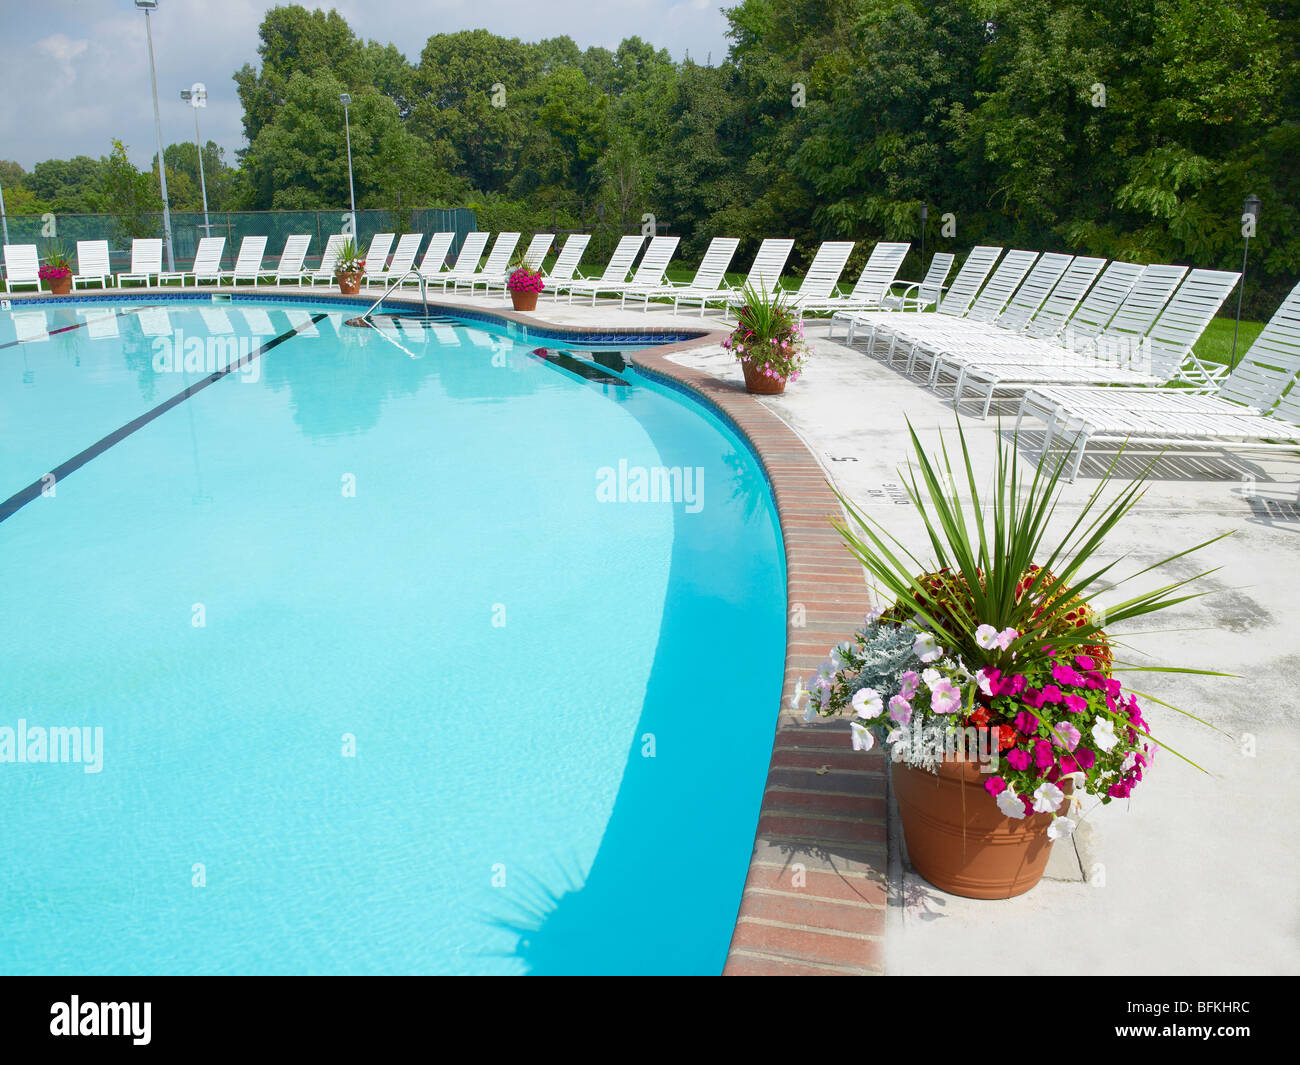 Swimming Pool With Deck Chairs And Potted Plants Flowers, Pennsylvania, USA Stock Photo